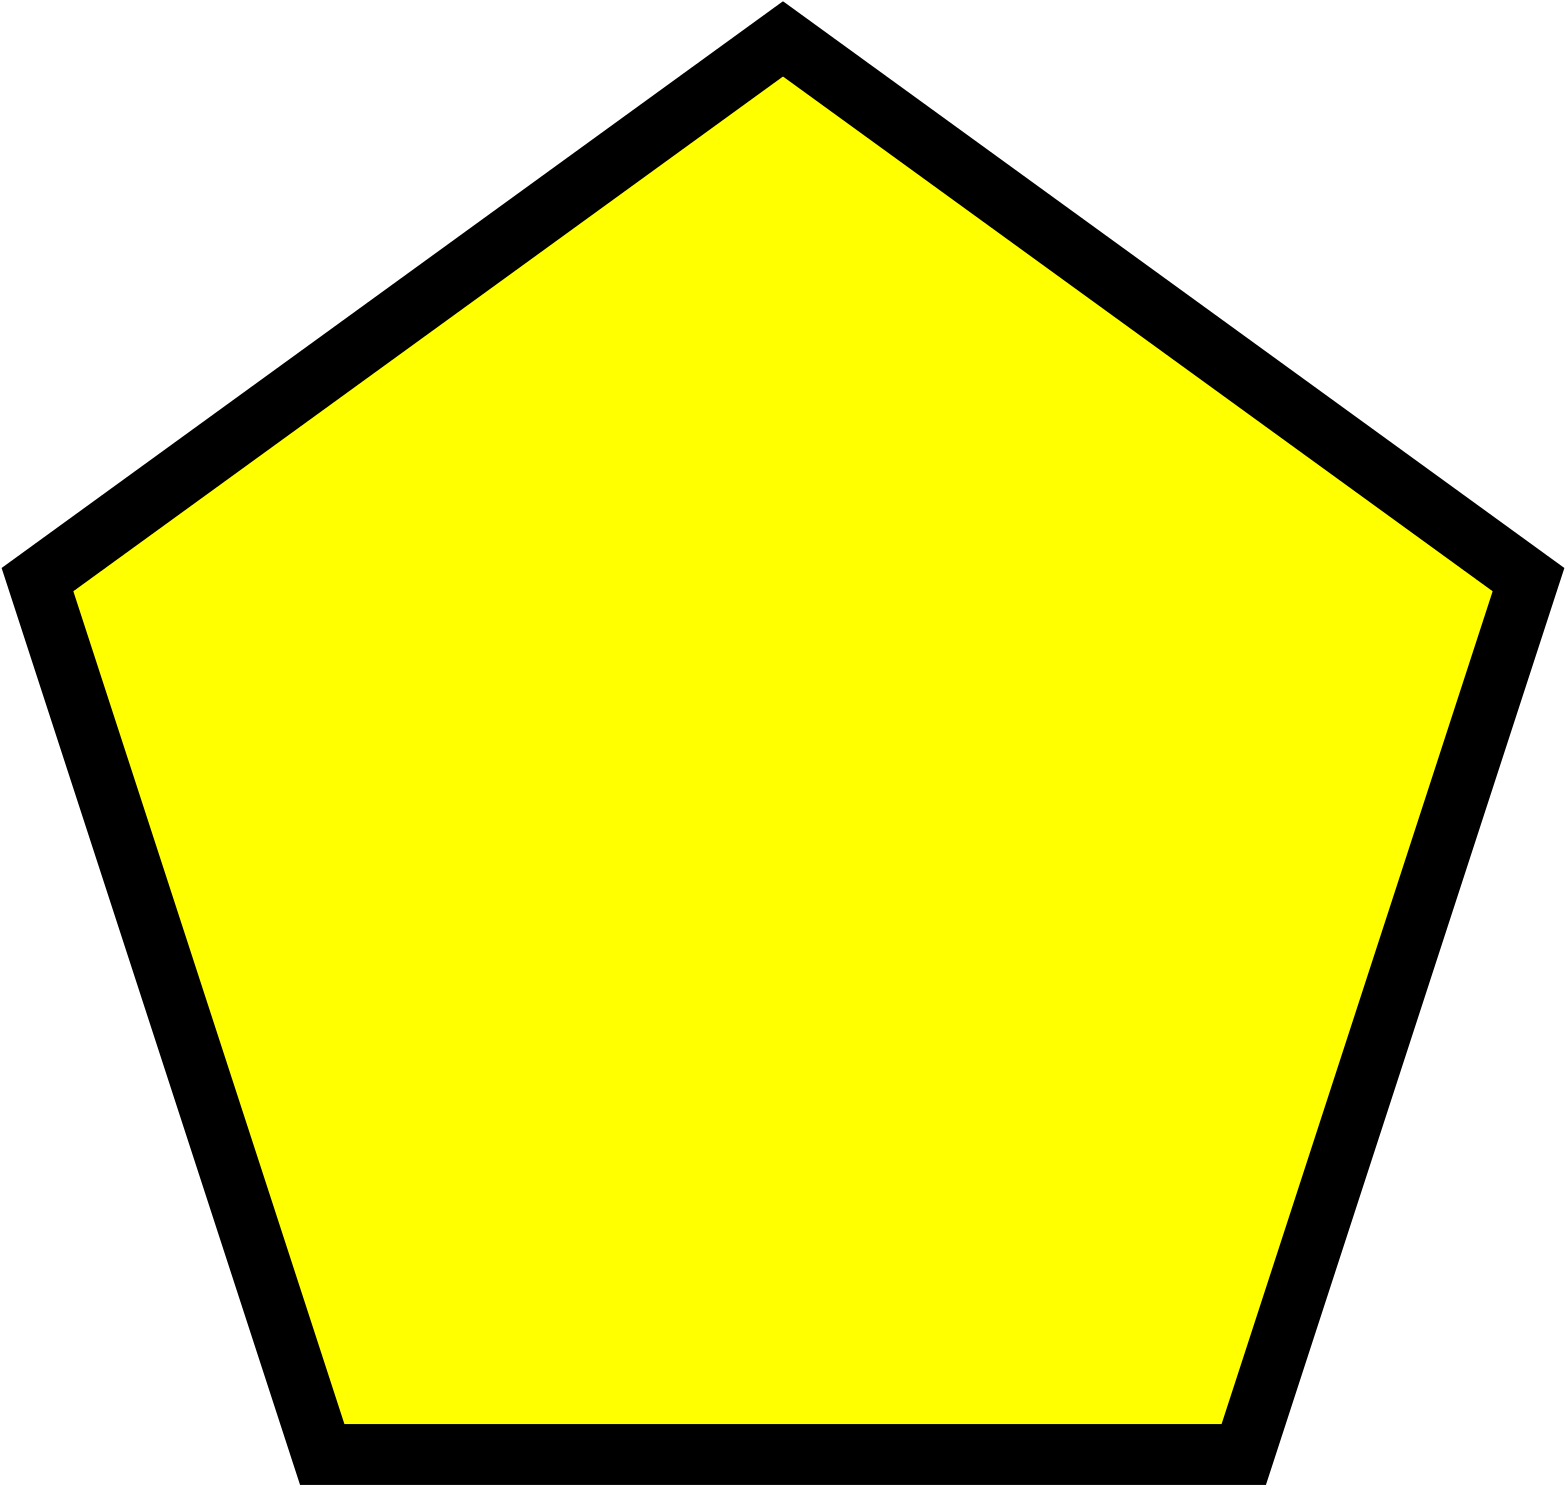 A Yellow Hexagon On A Black Background